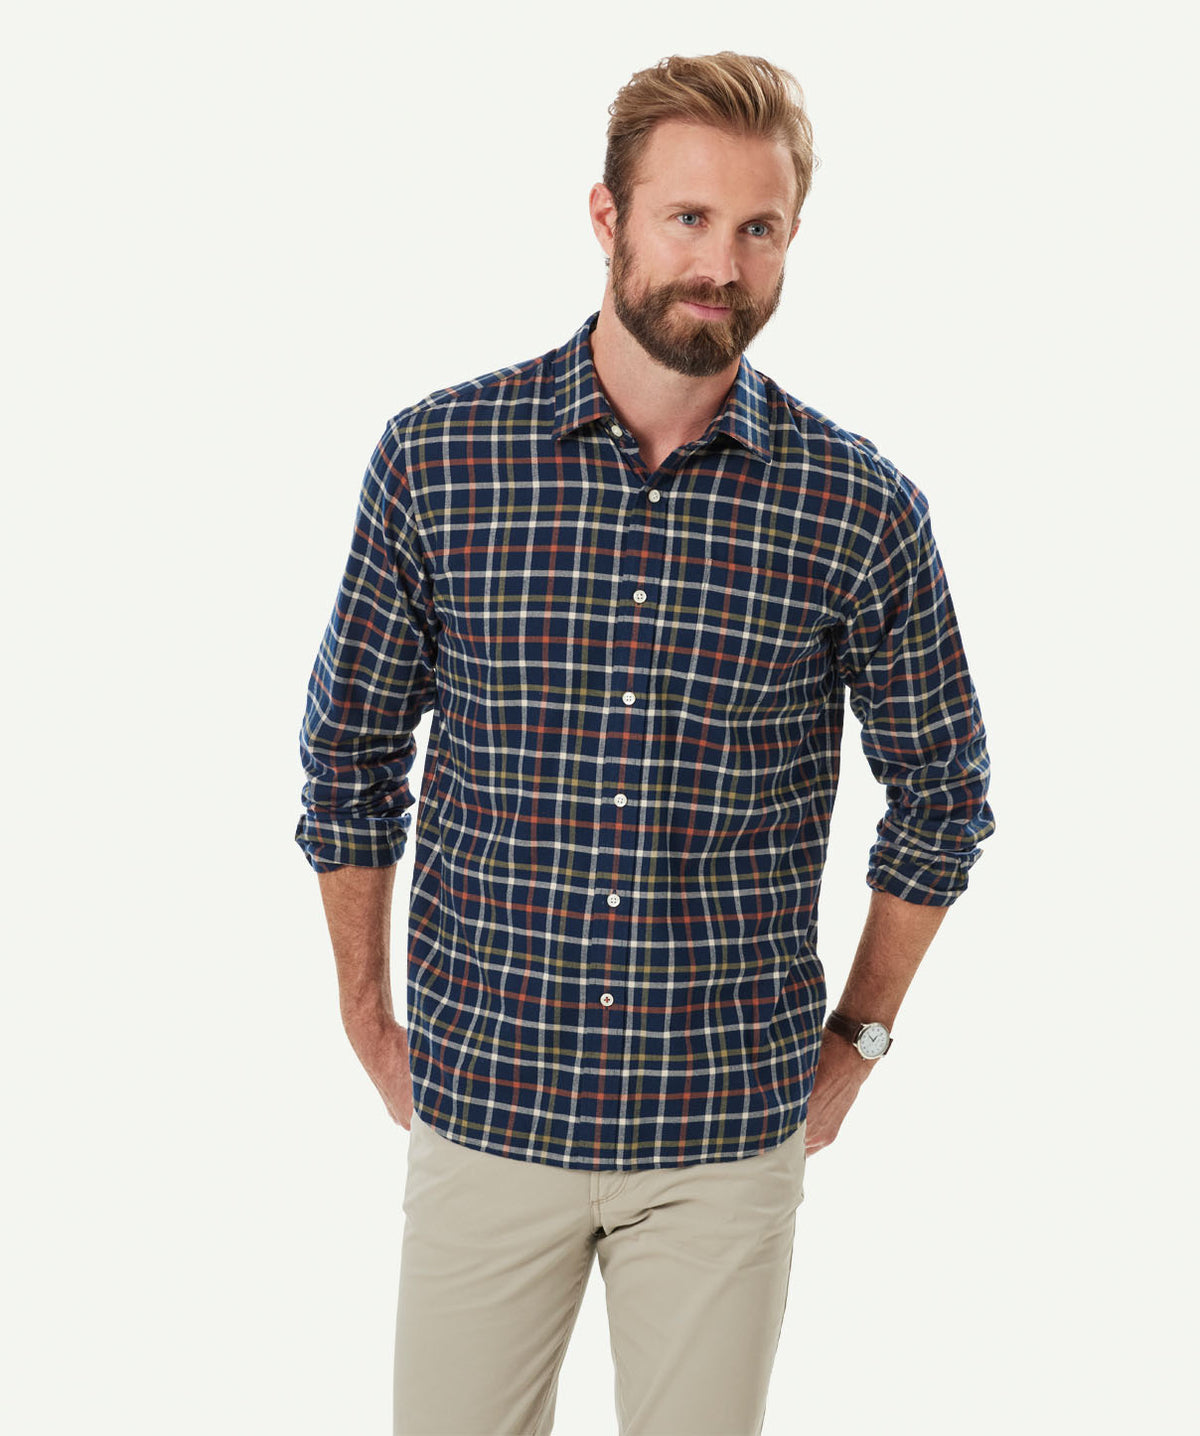 Brushed Twill Checked Long Sleeve Shirt